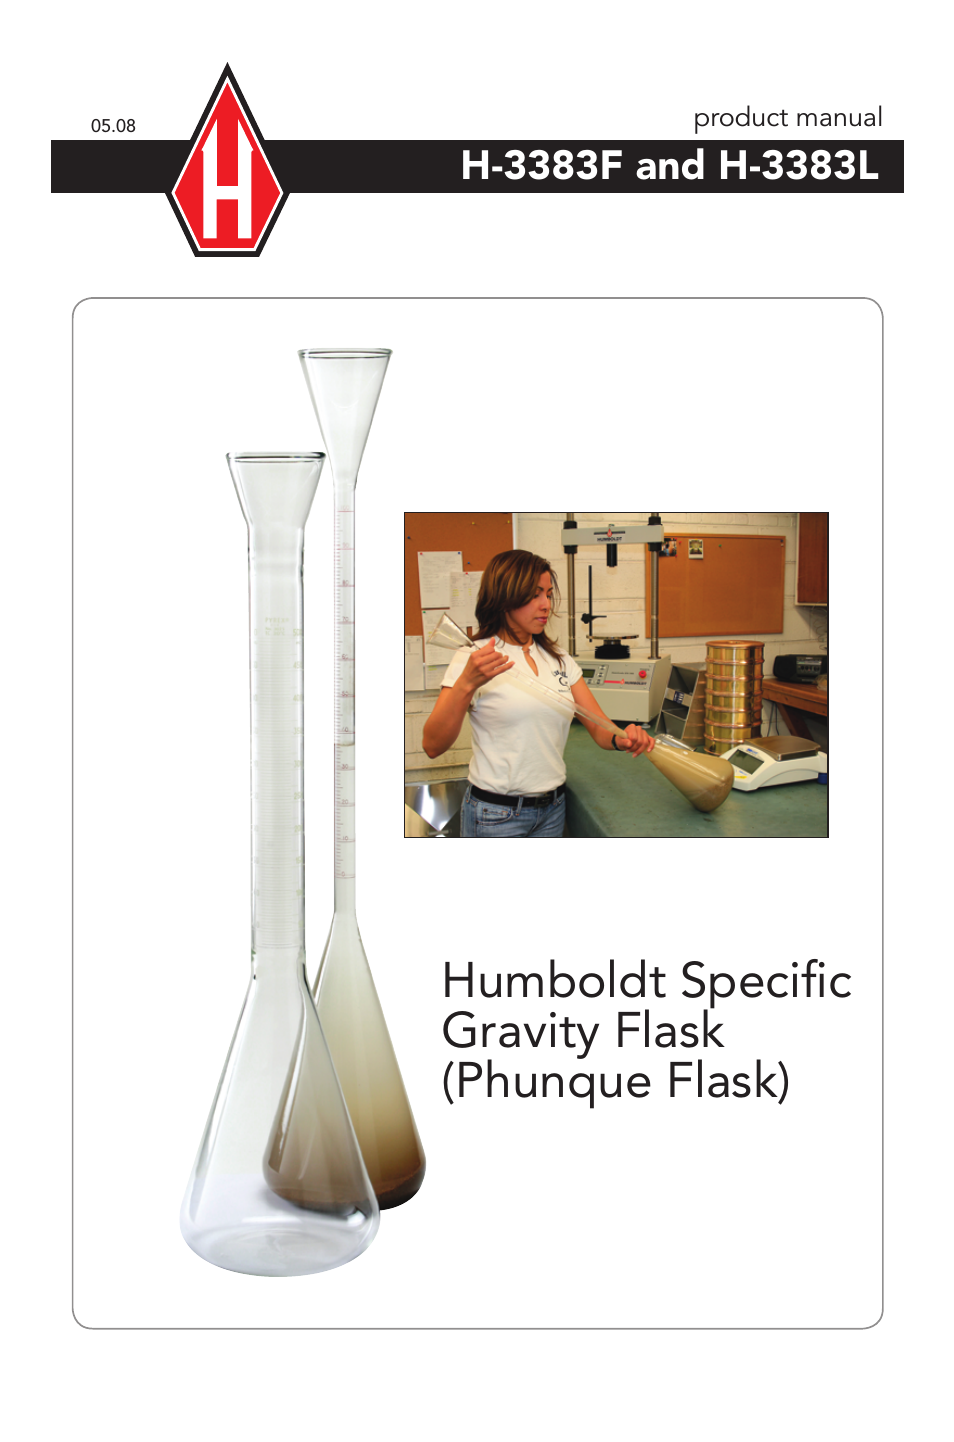 H-3383F Humboldt Specific Gravity Flask (Phunque Flask)